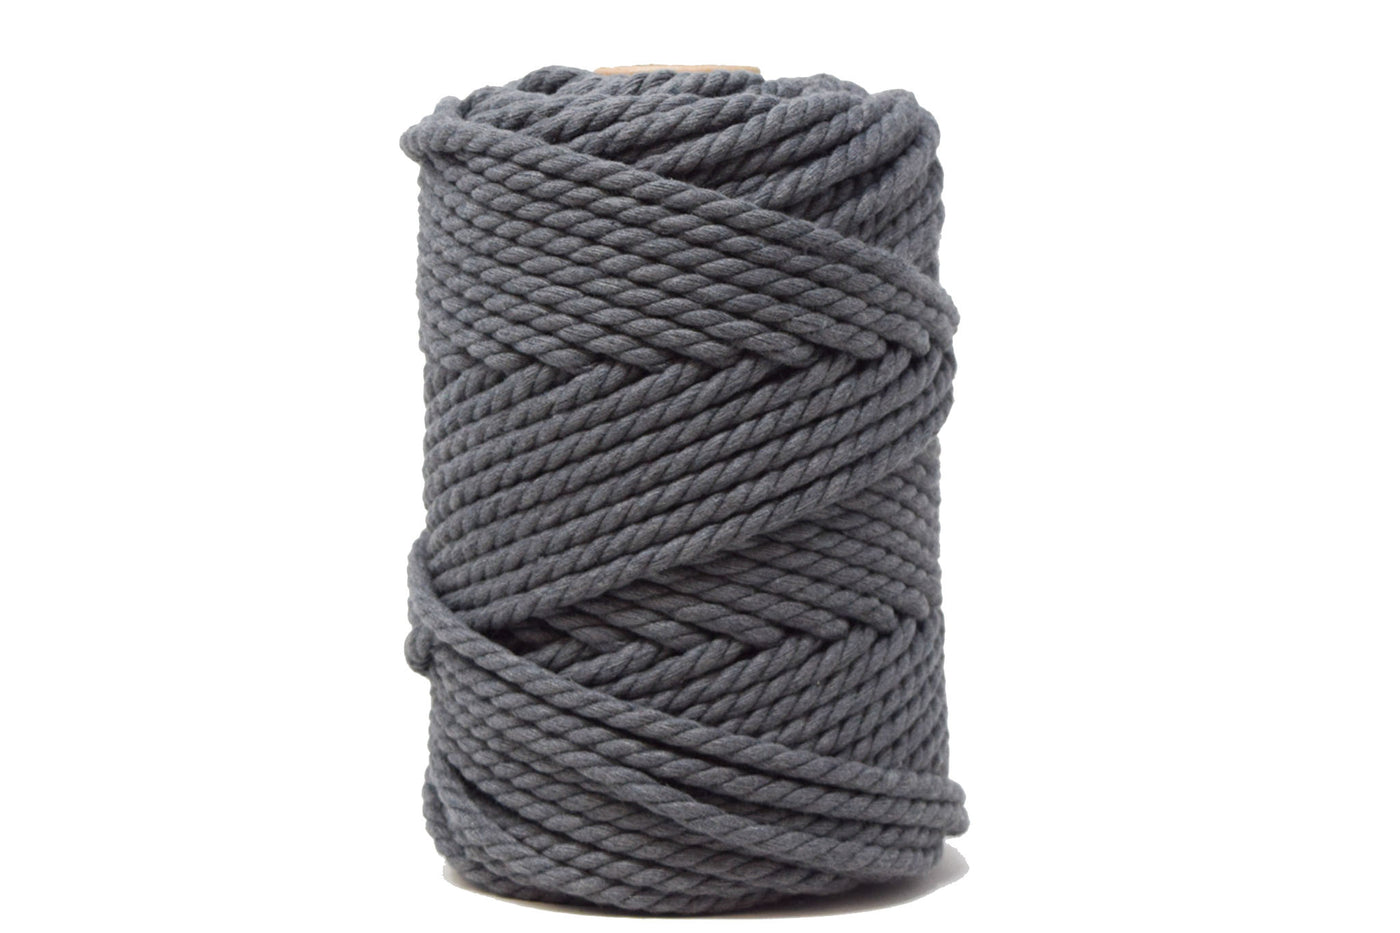 COTTON ROPE ZERO WASTE 5 MM - 3 PLY - CHARCOAL GRAY COLOR